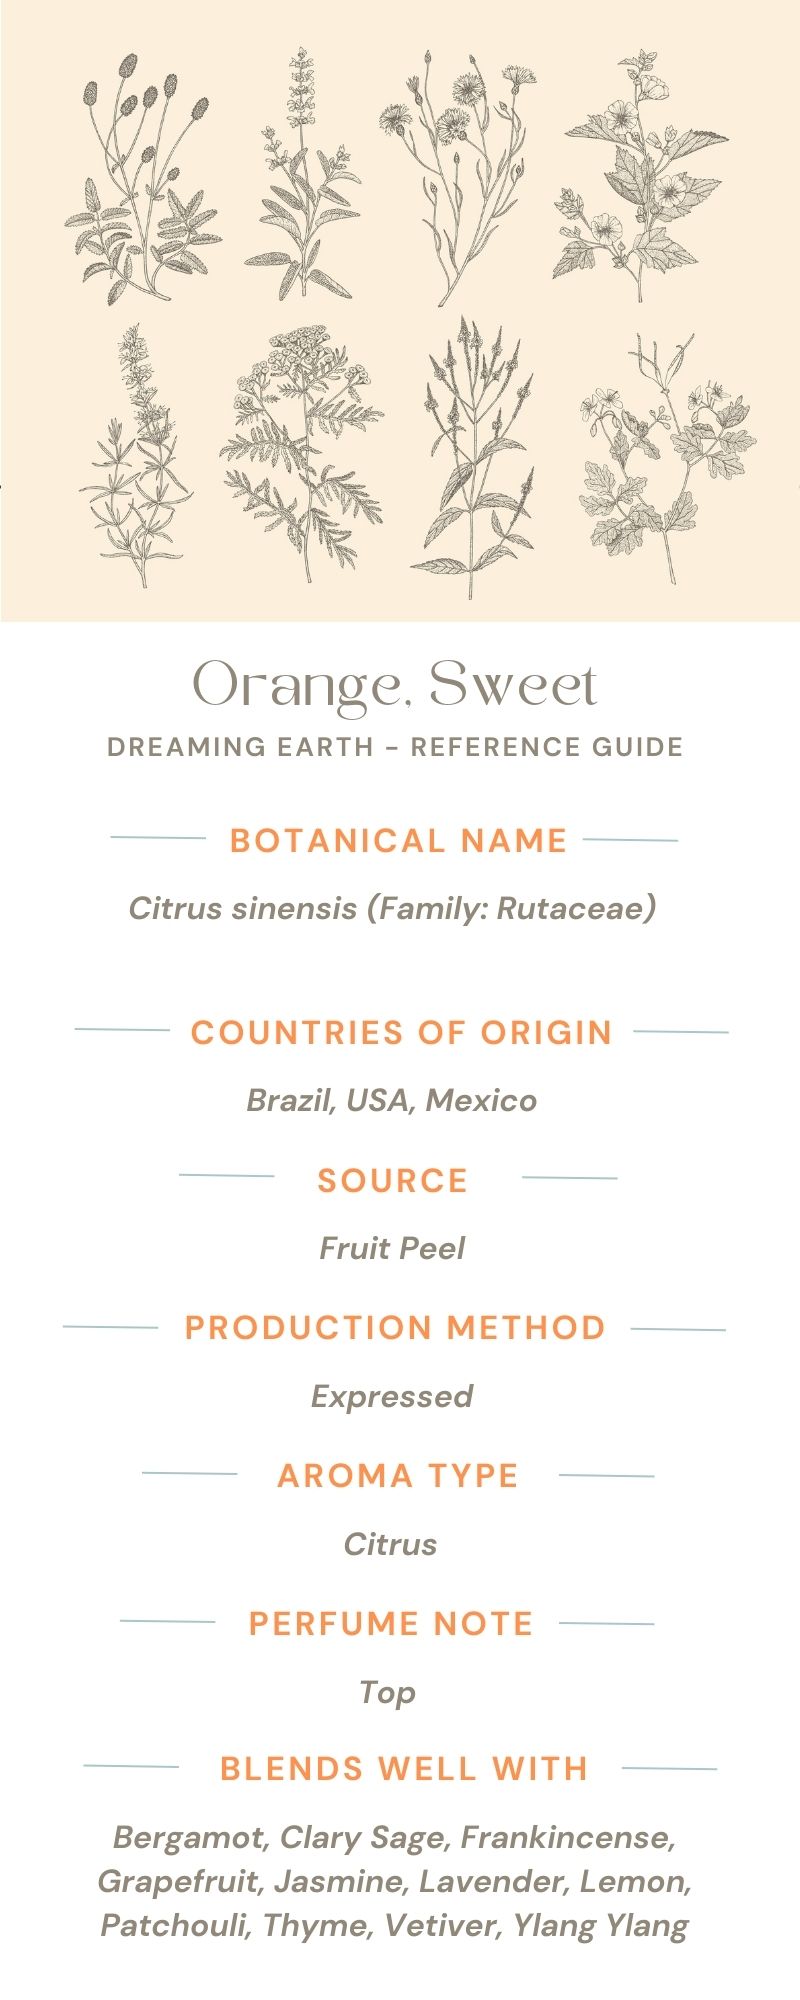 Load image into Gallery viewer, Orange, Sweet Essential Oil - Dreaming Earth Inc
